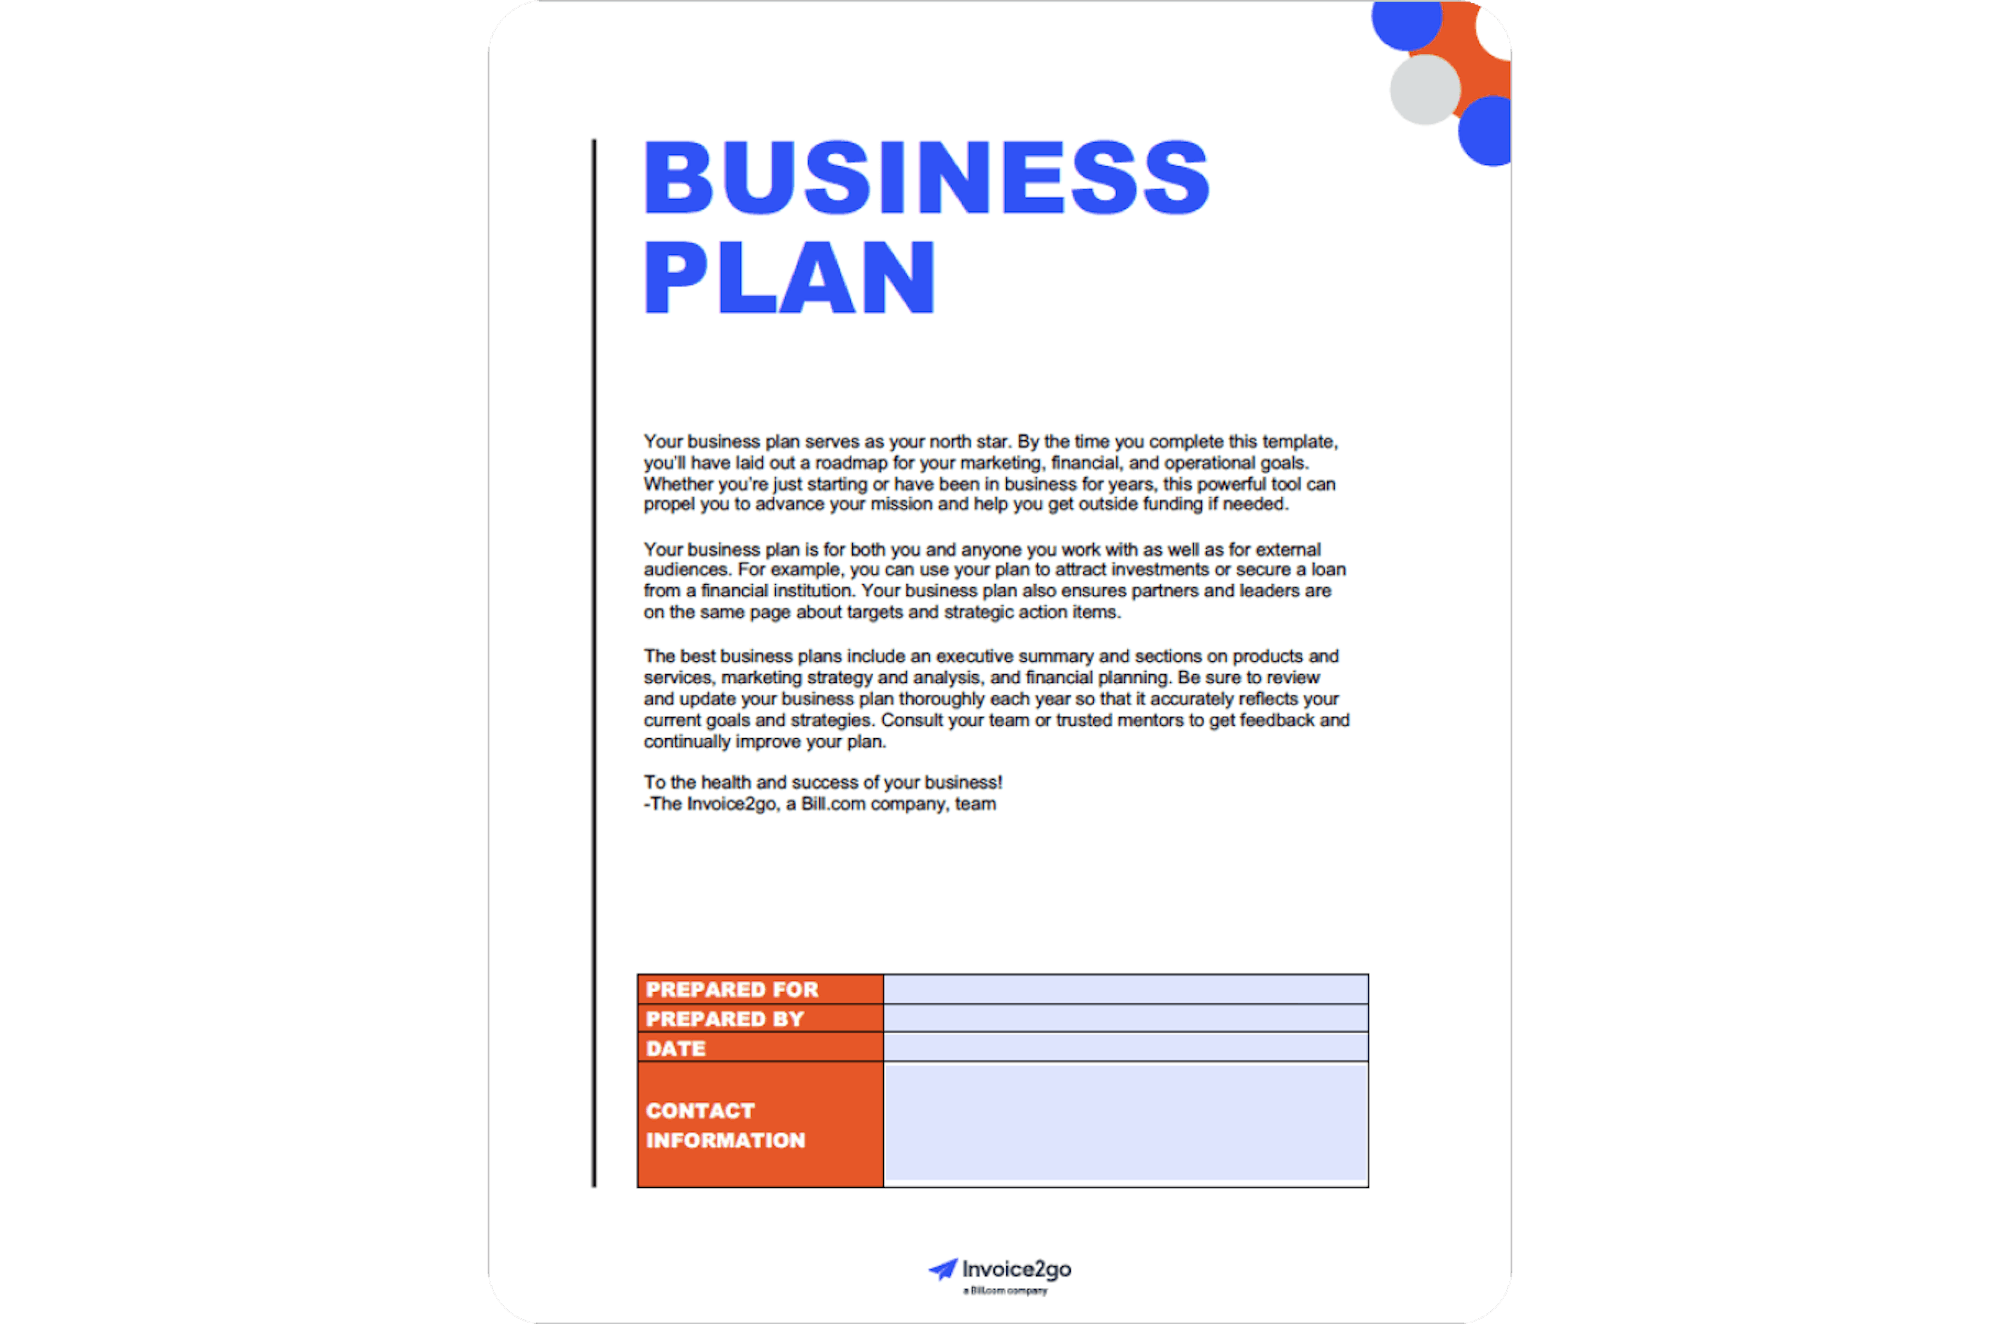 Free Downloadable Business Plan Templates Invoice2go